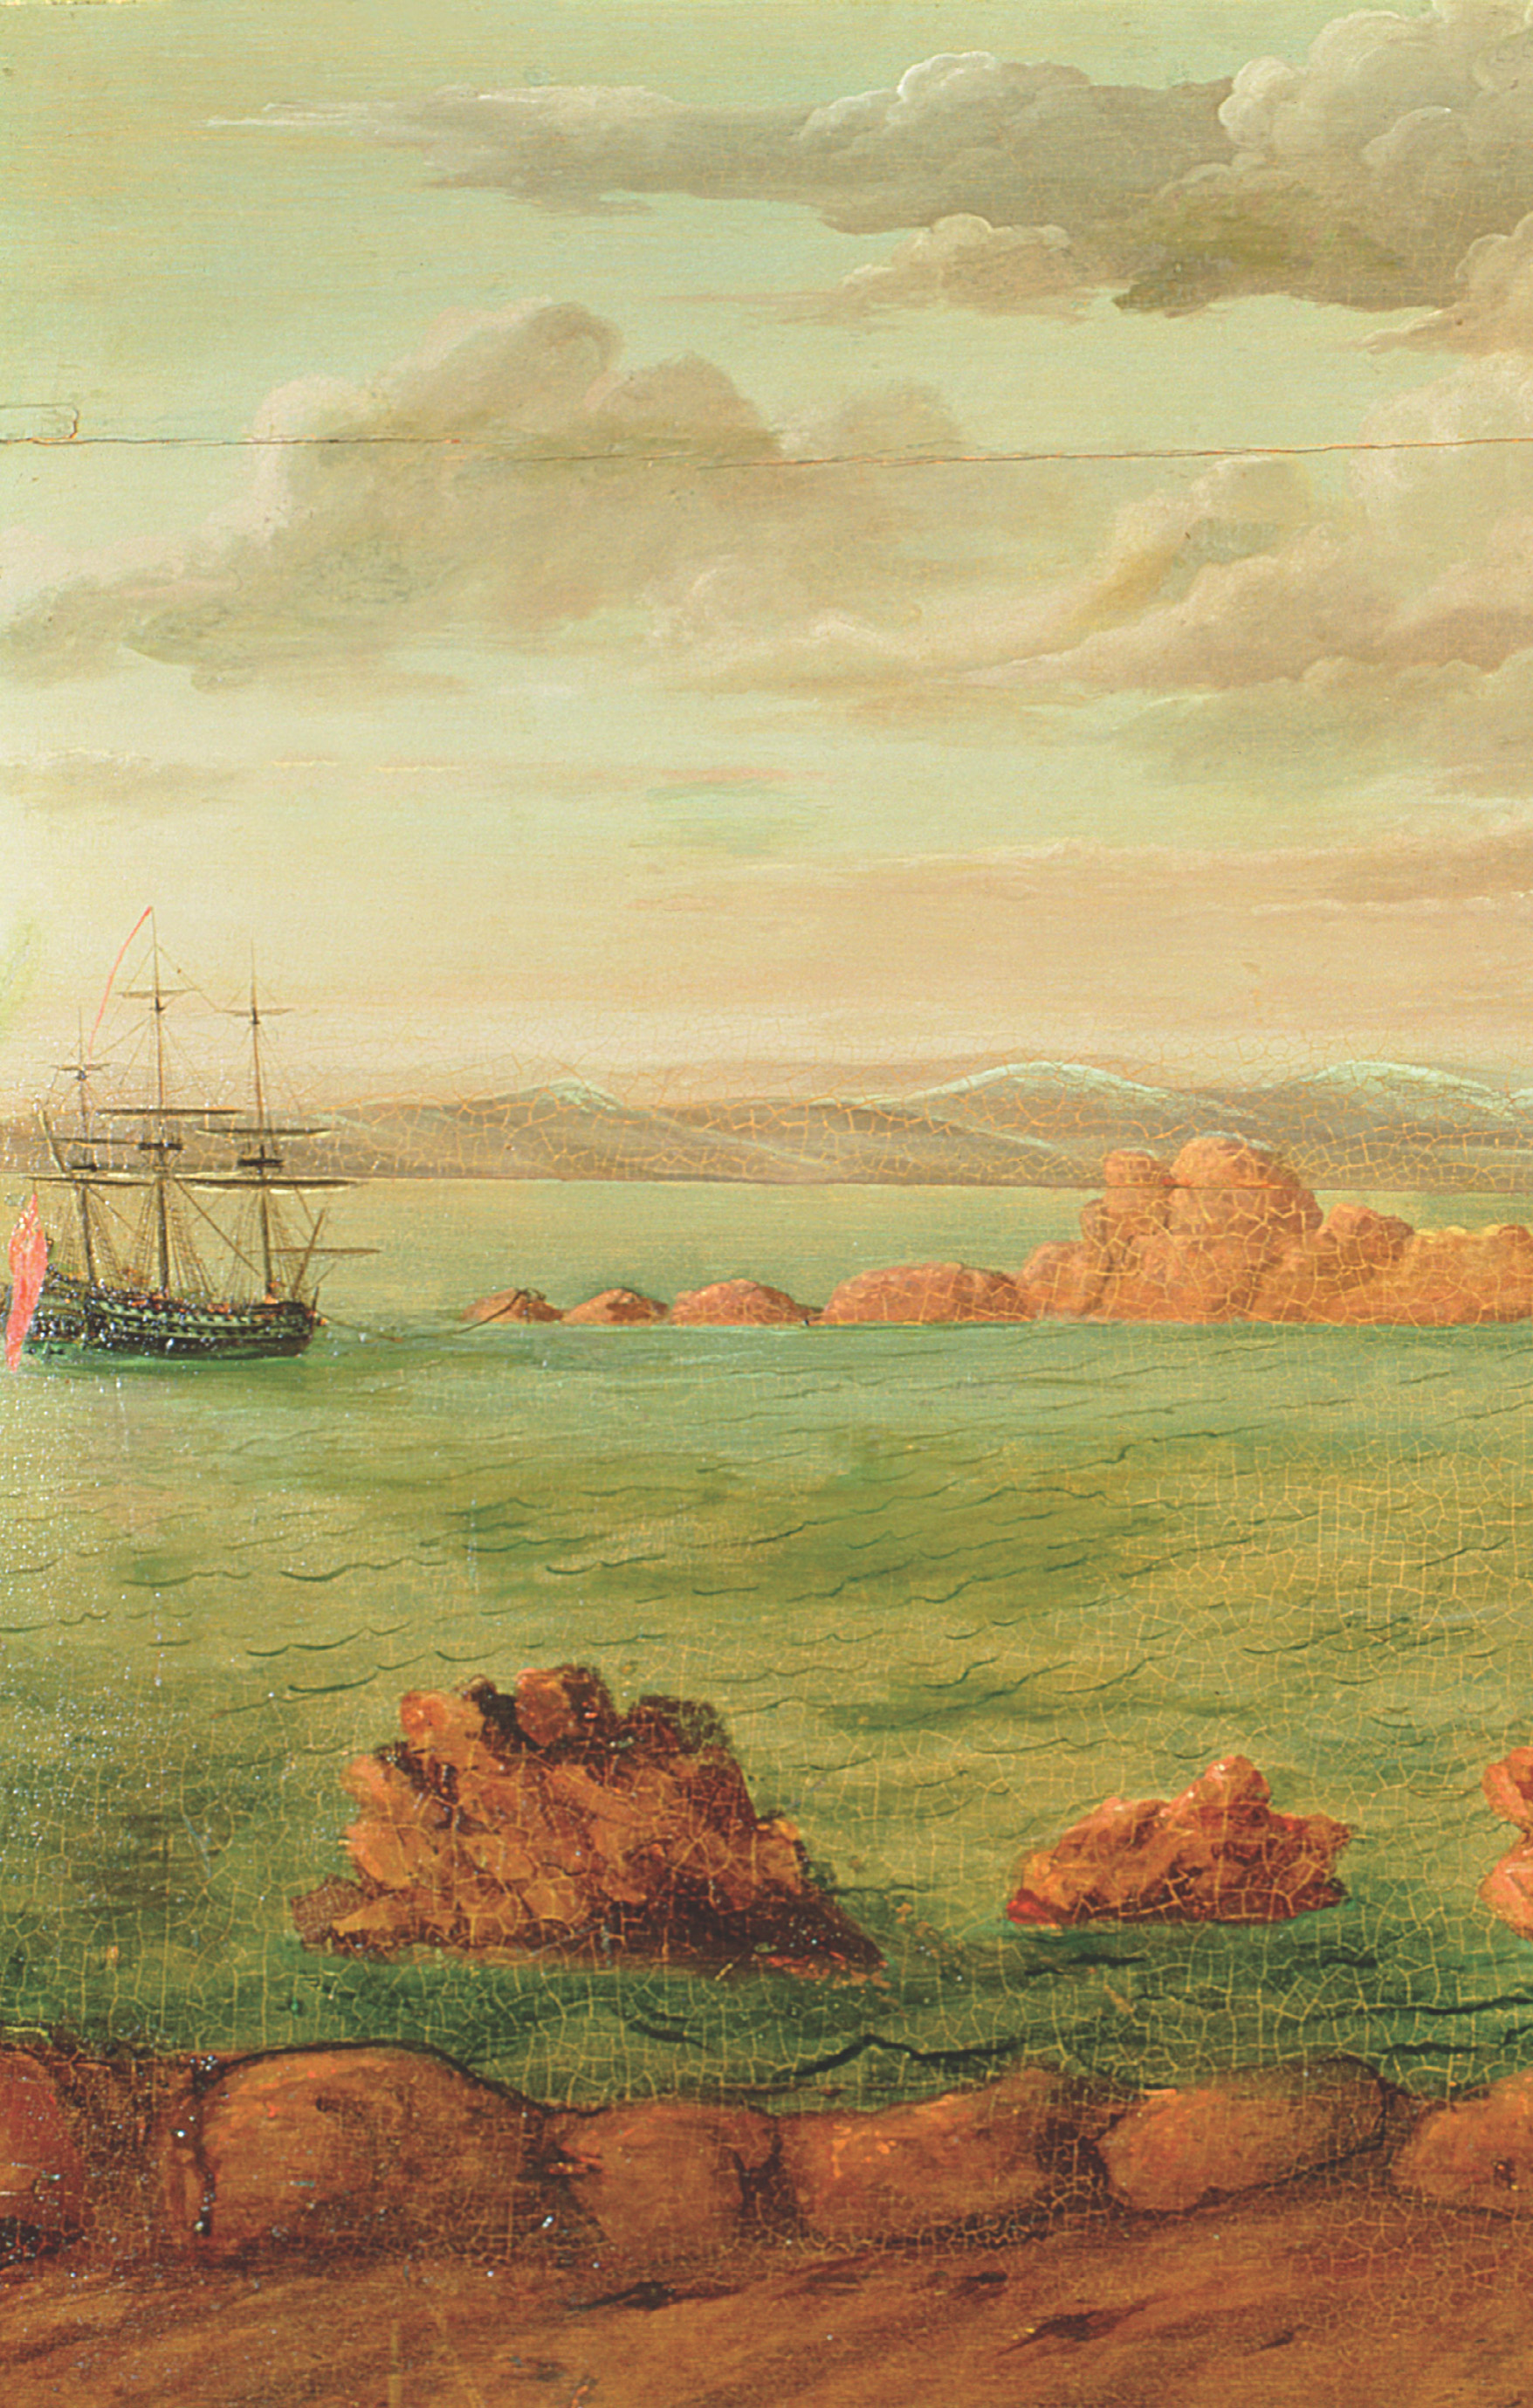 Painting shows a tall-masted ship in a harbor.